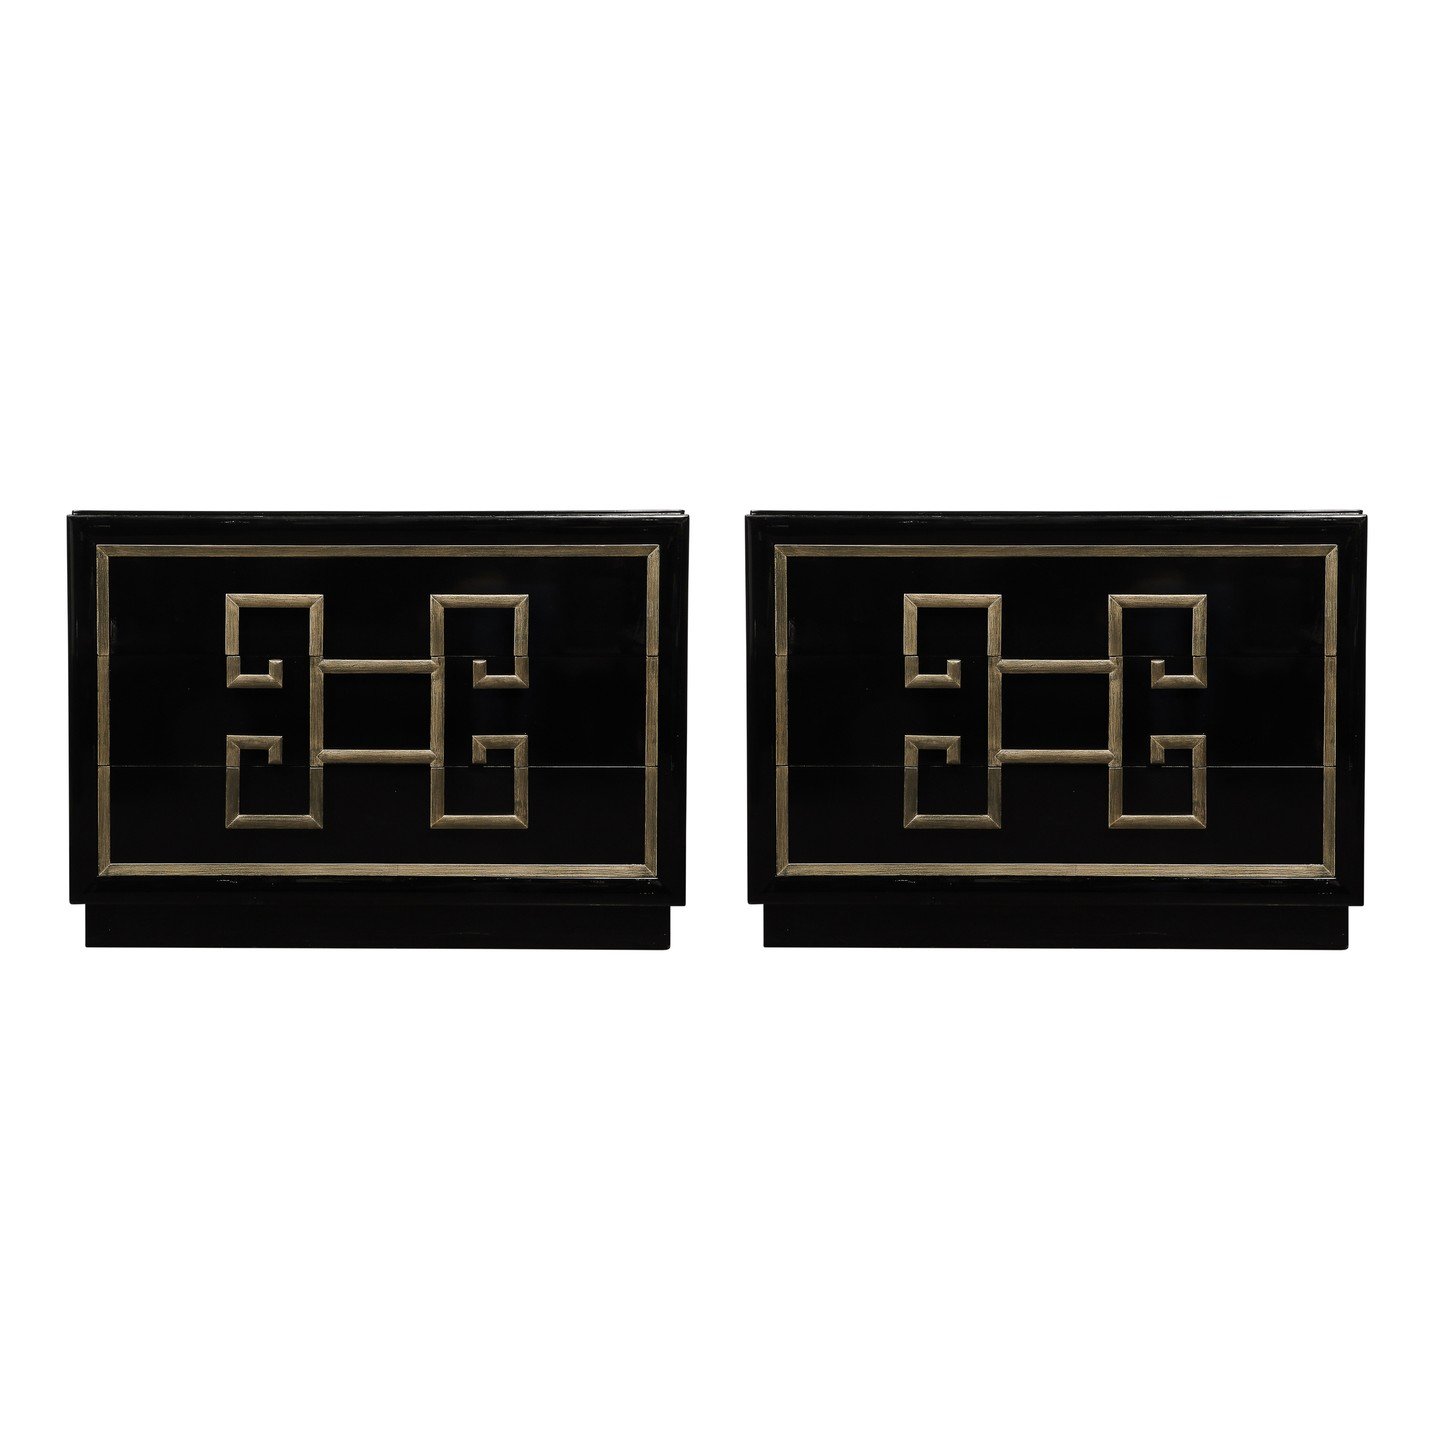 Pair of Mid-Century Modernist &quot;Mandarin&quot; Black Lacquer Low Chests by Kittinger

This bold and thoughtfully composed Pair of Mid-Century Modernist &quot;Mandarin&quot; Low Chests in Black Lacquer with Antique White Gold Greek Key Detailing a